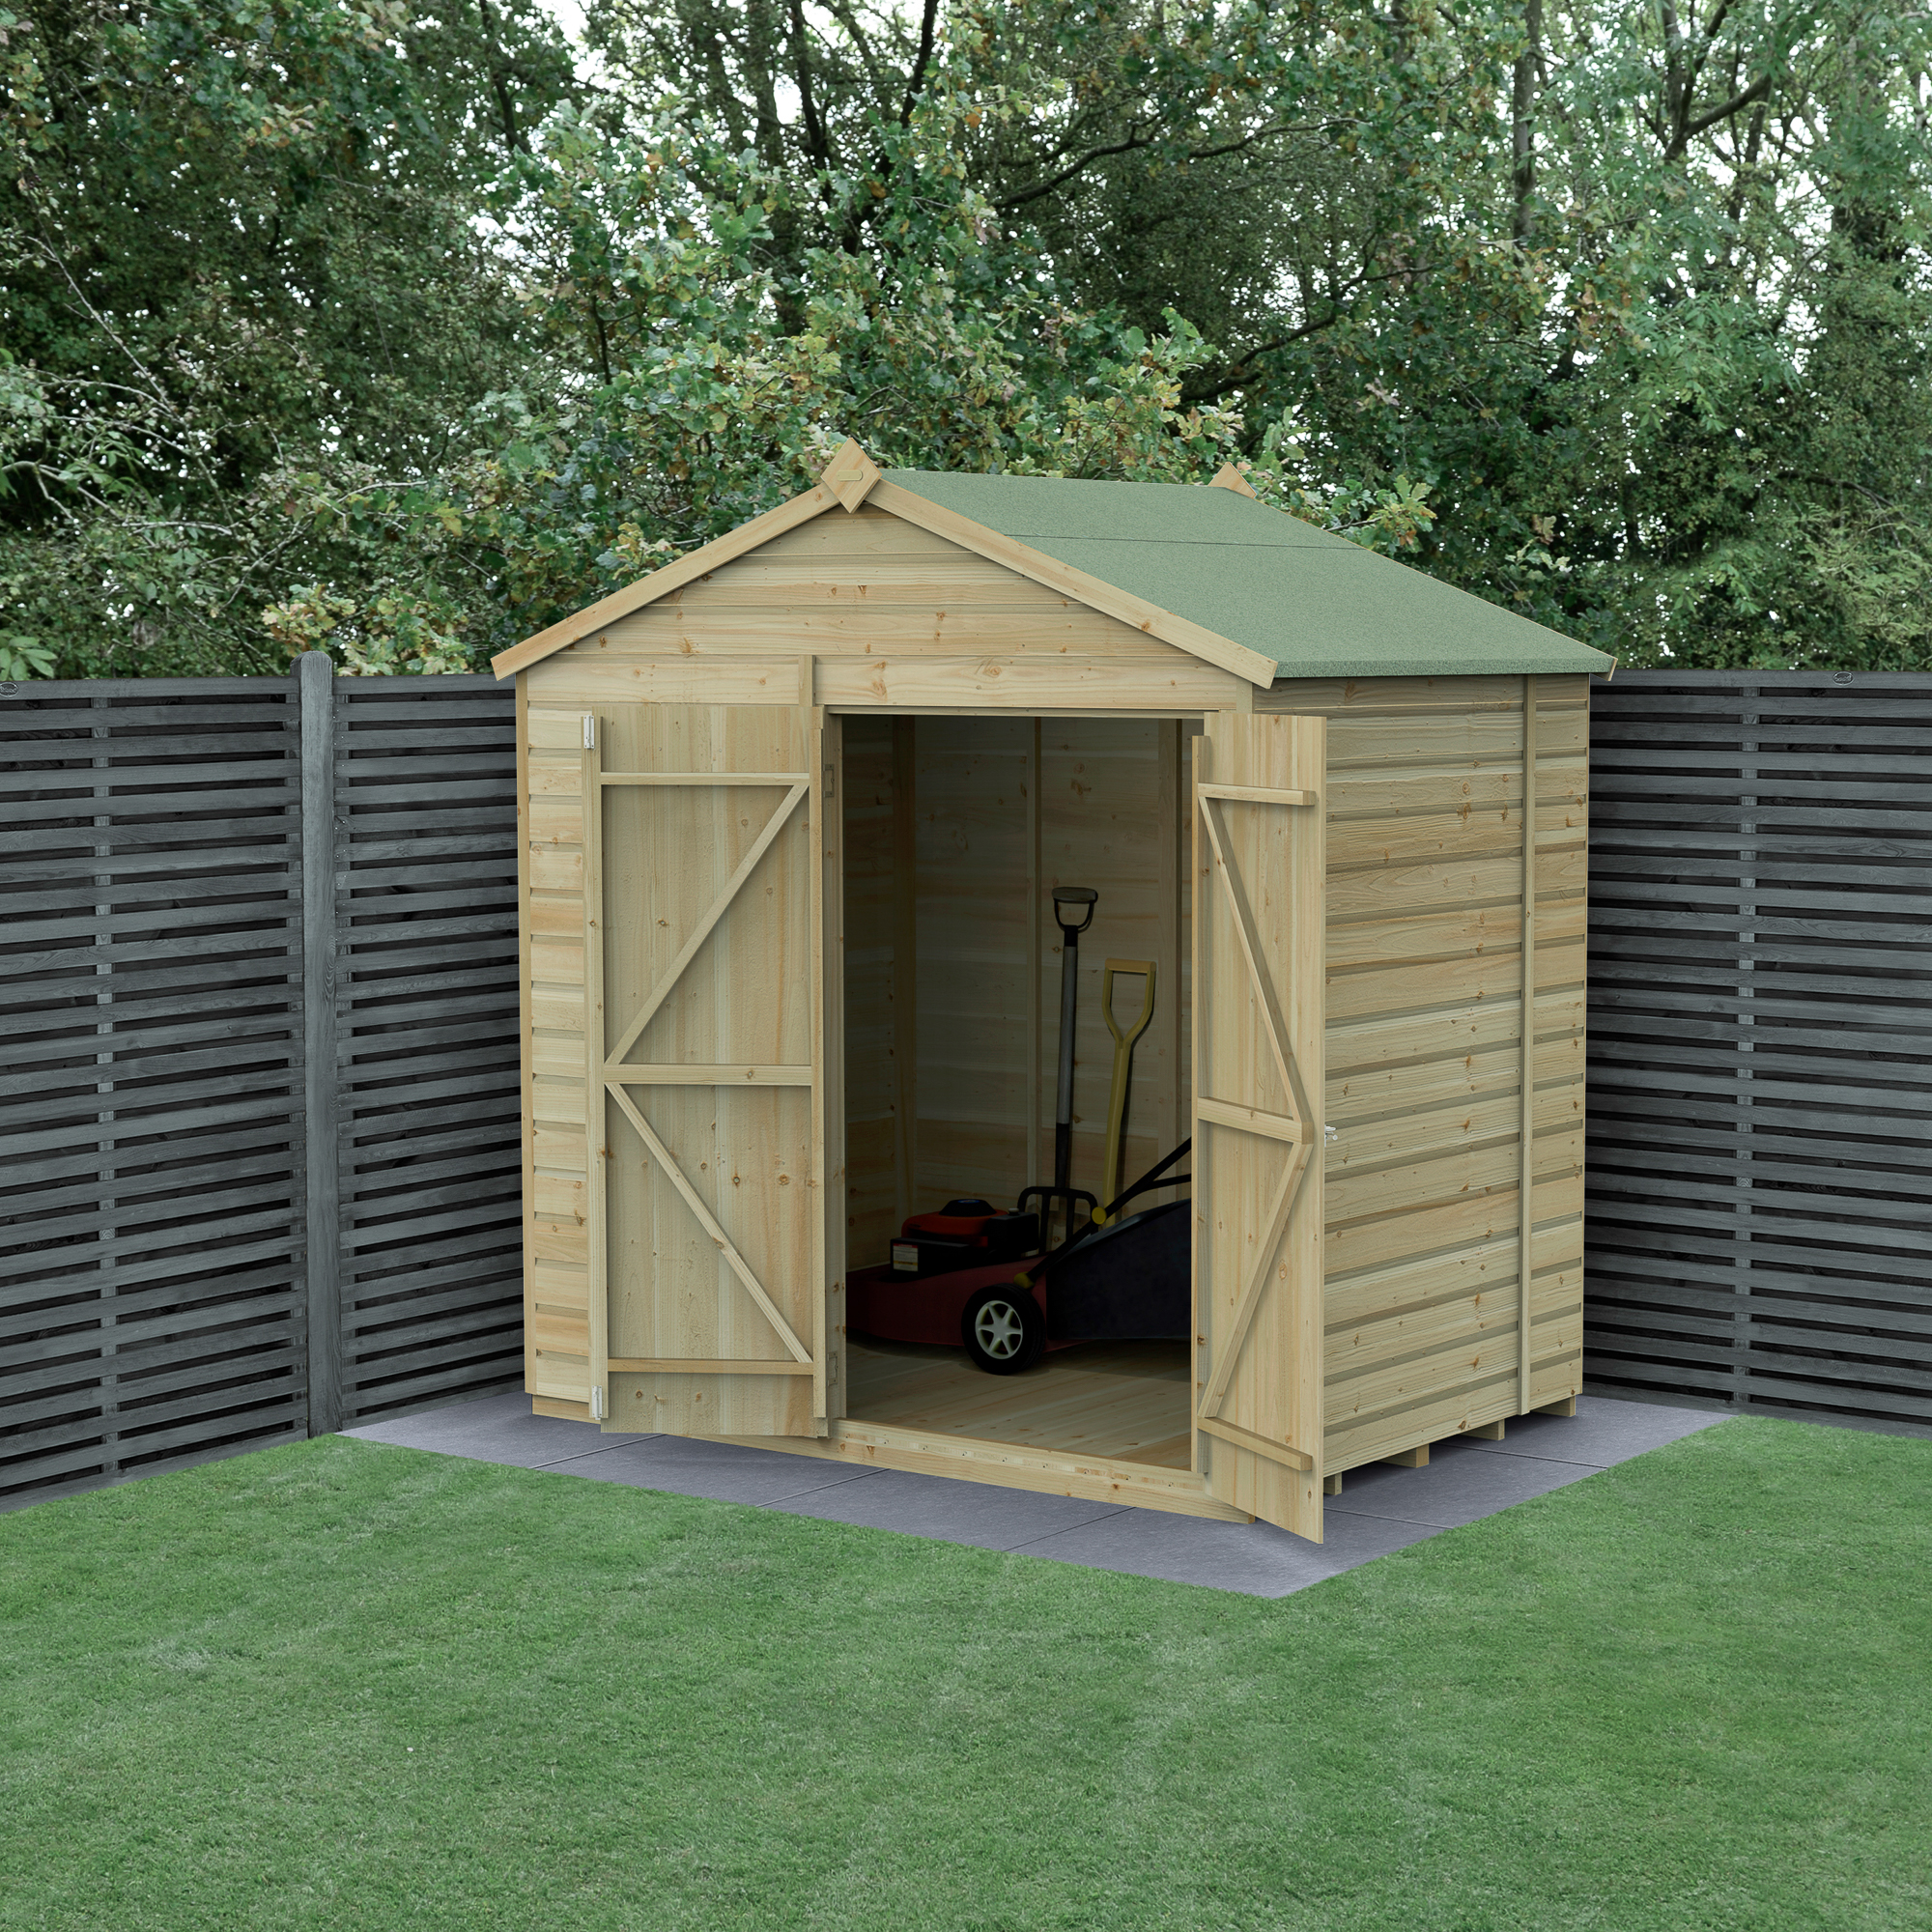 Forest Garden Beckwood 7 x 5ft Apex Shiplap Pressure Treated Double Door Windowless Shed with Base